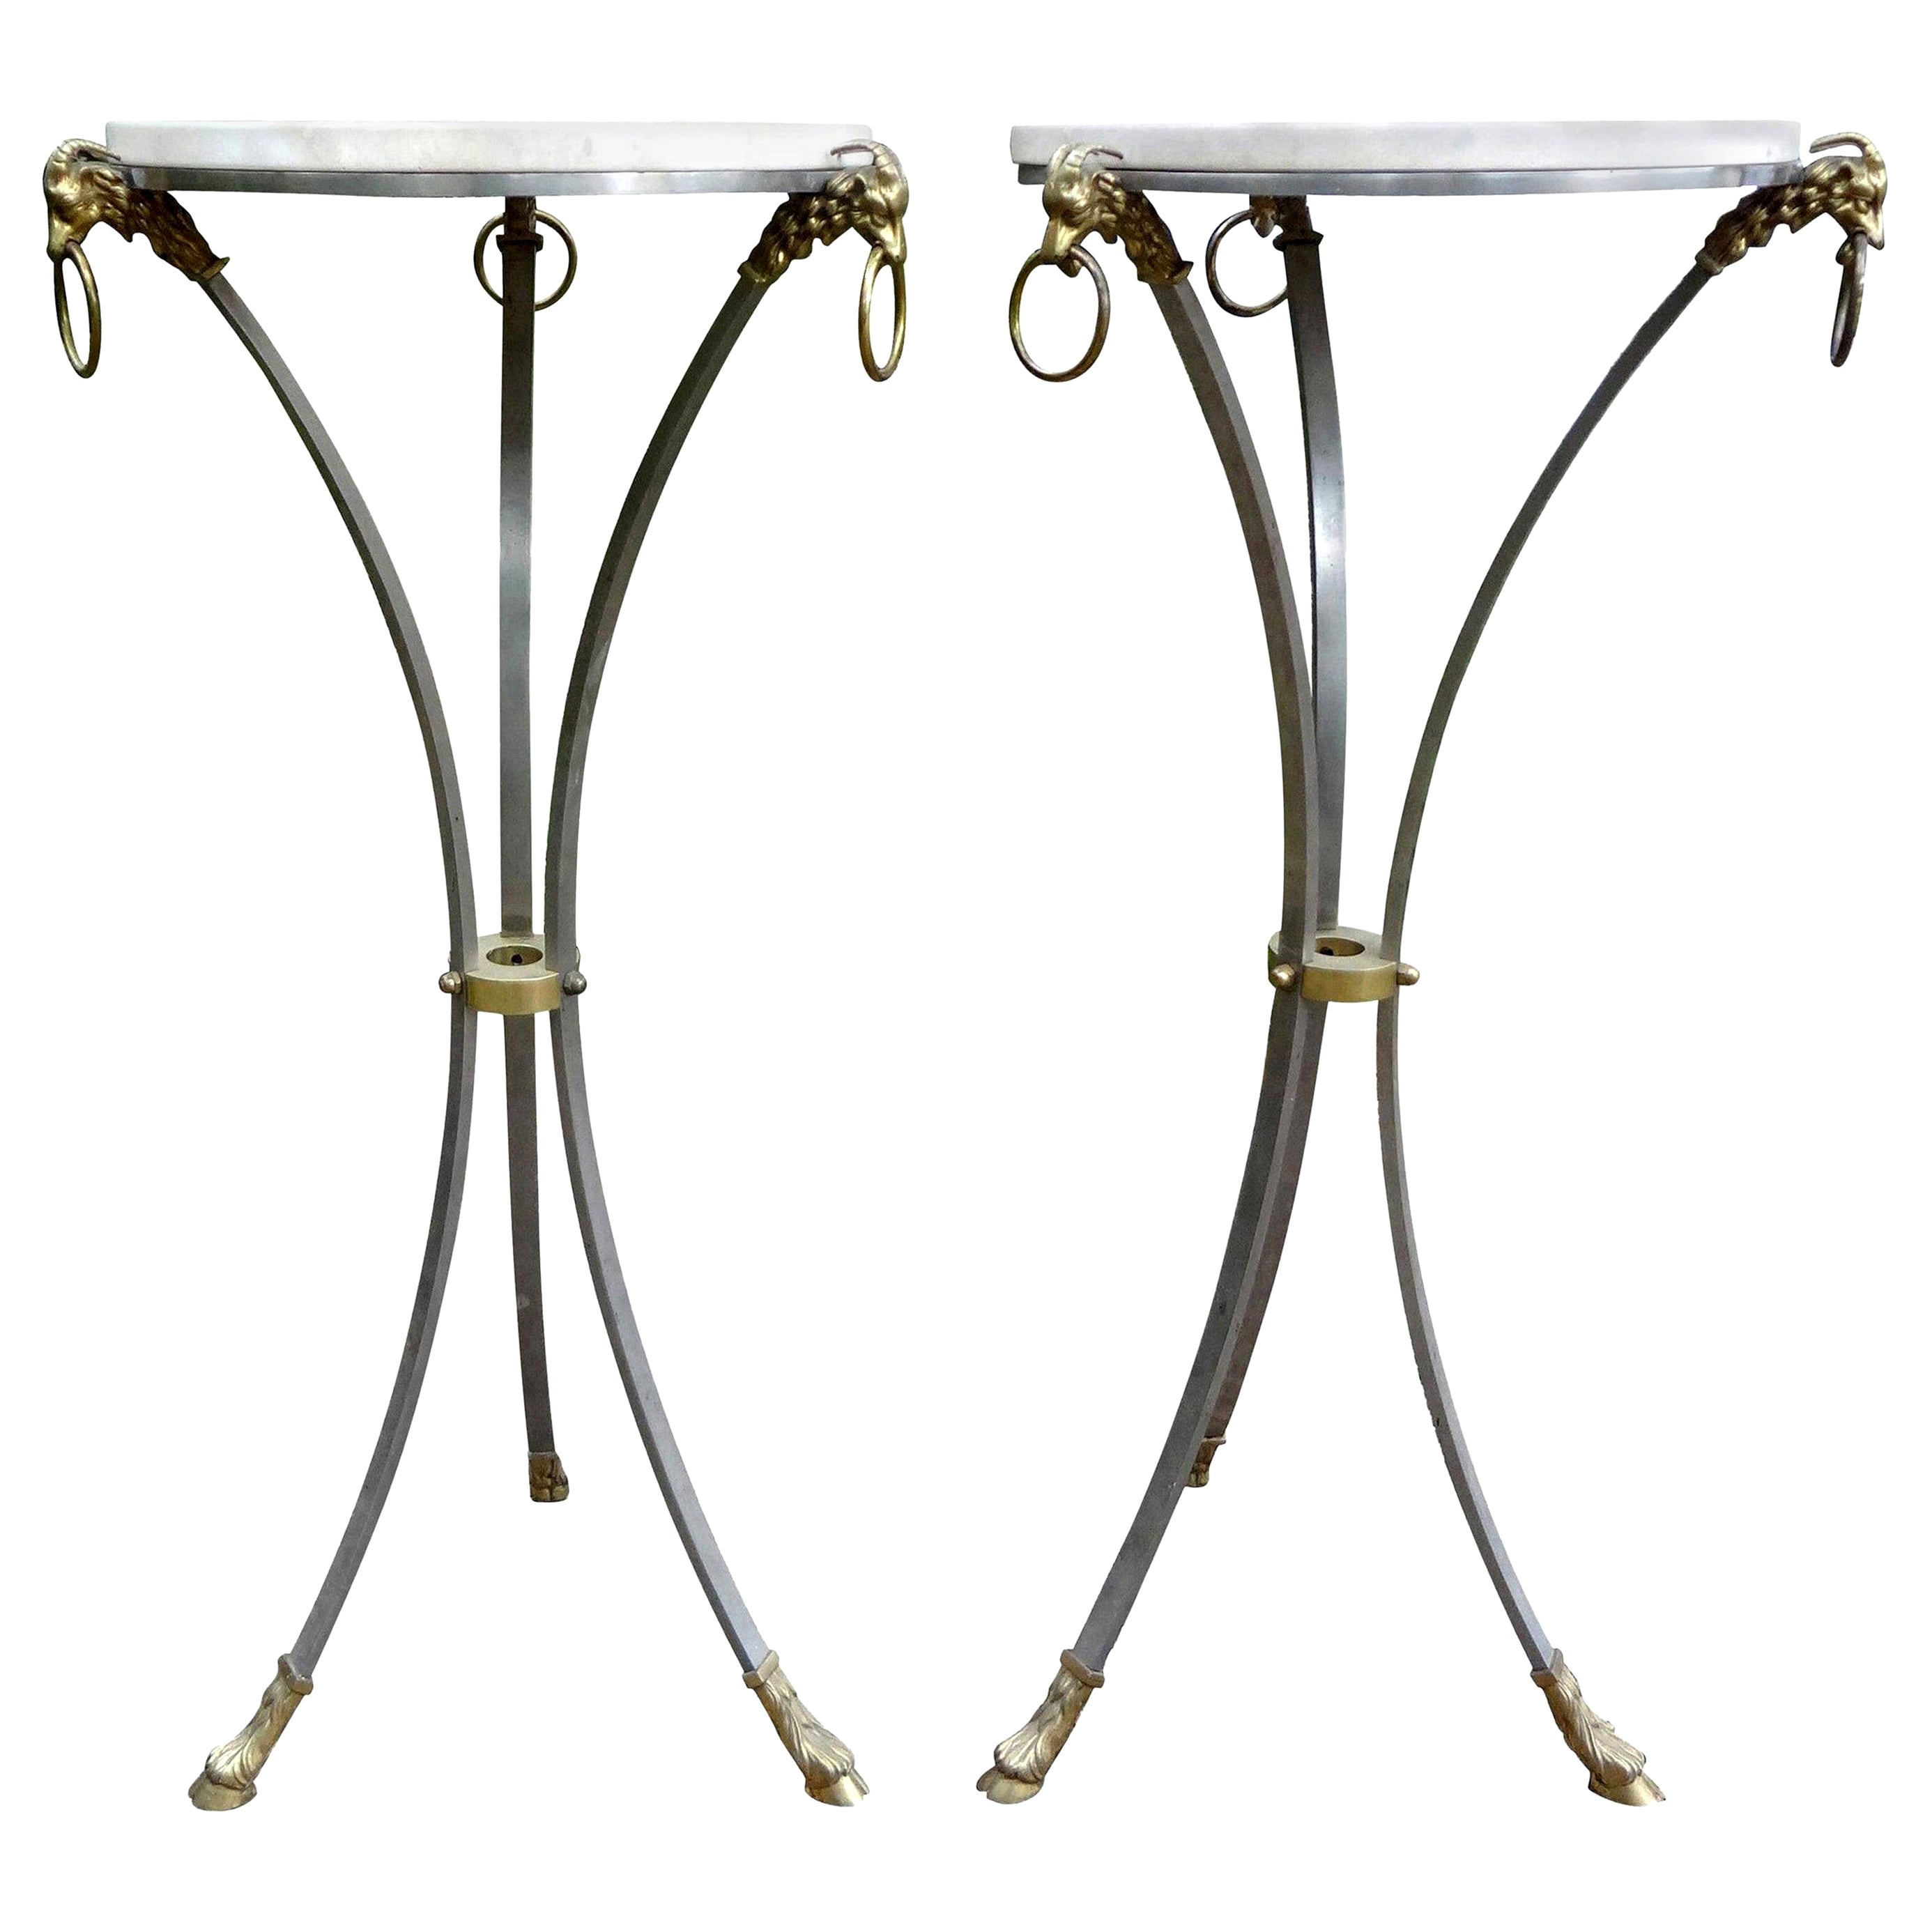 Pair of Italian Brushed Steel and Brass Pedestals with Travertine Tops